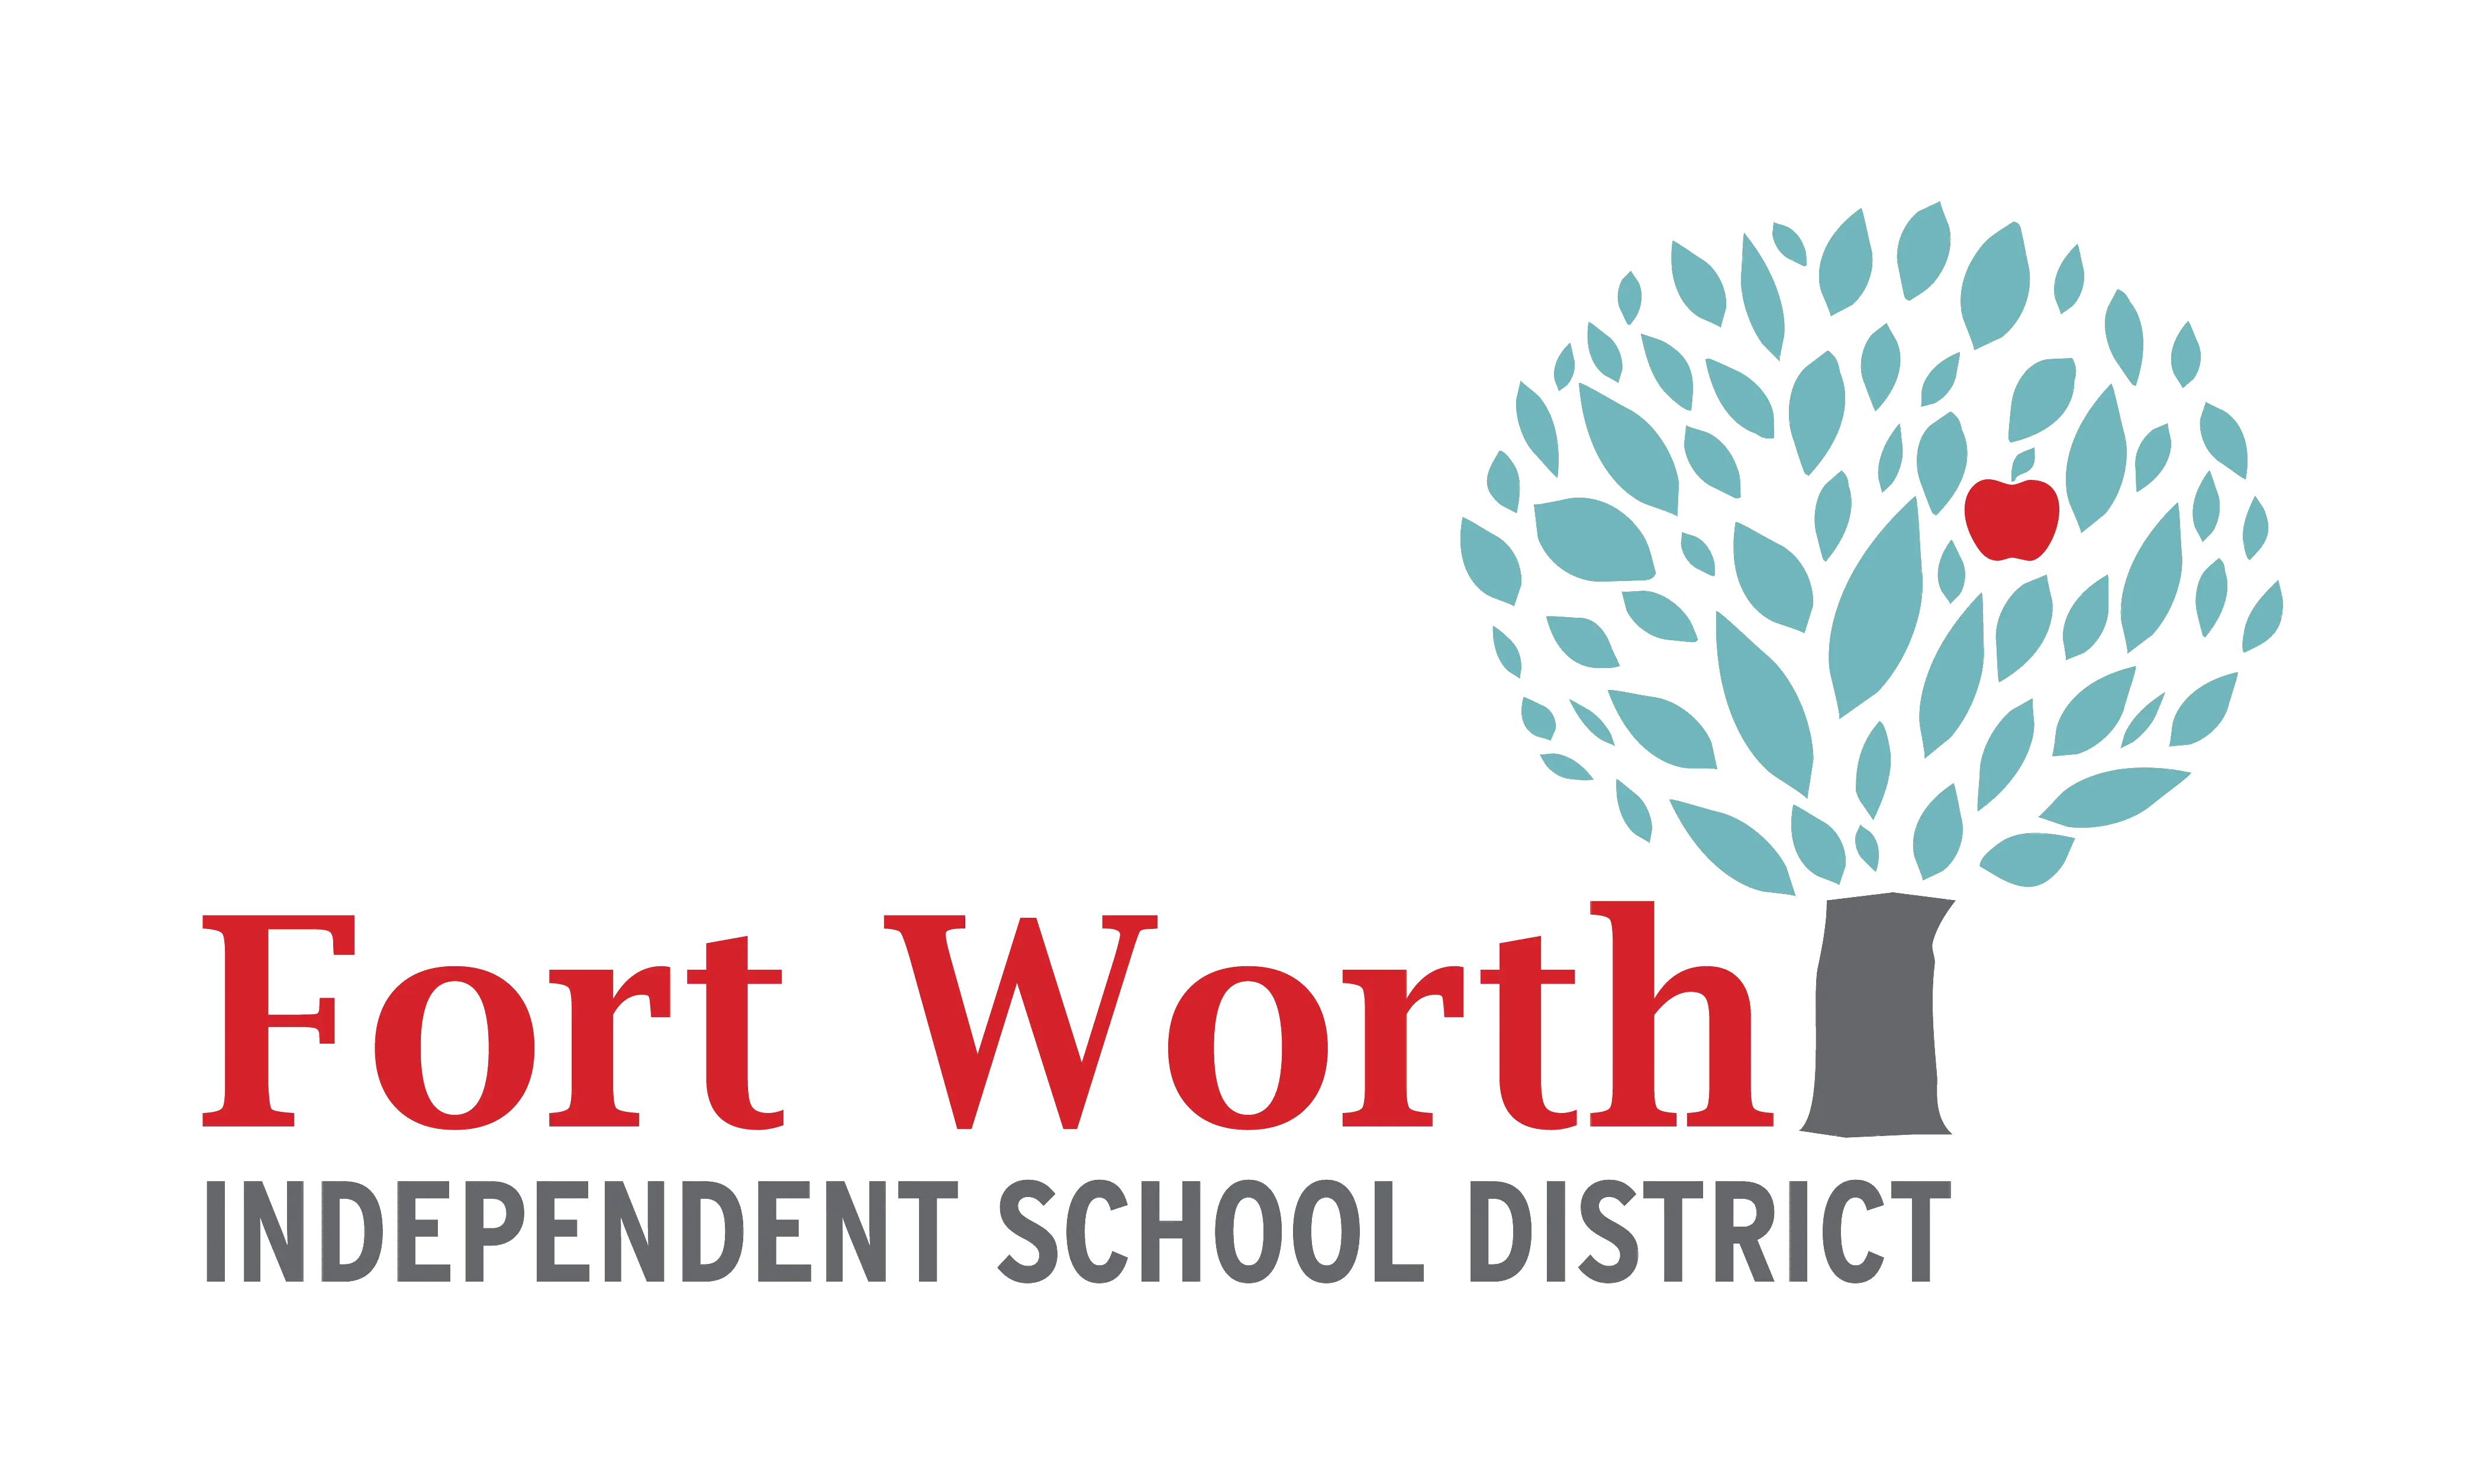 Fort Worth Independent School District - Panorama Client